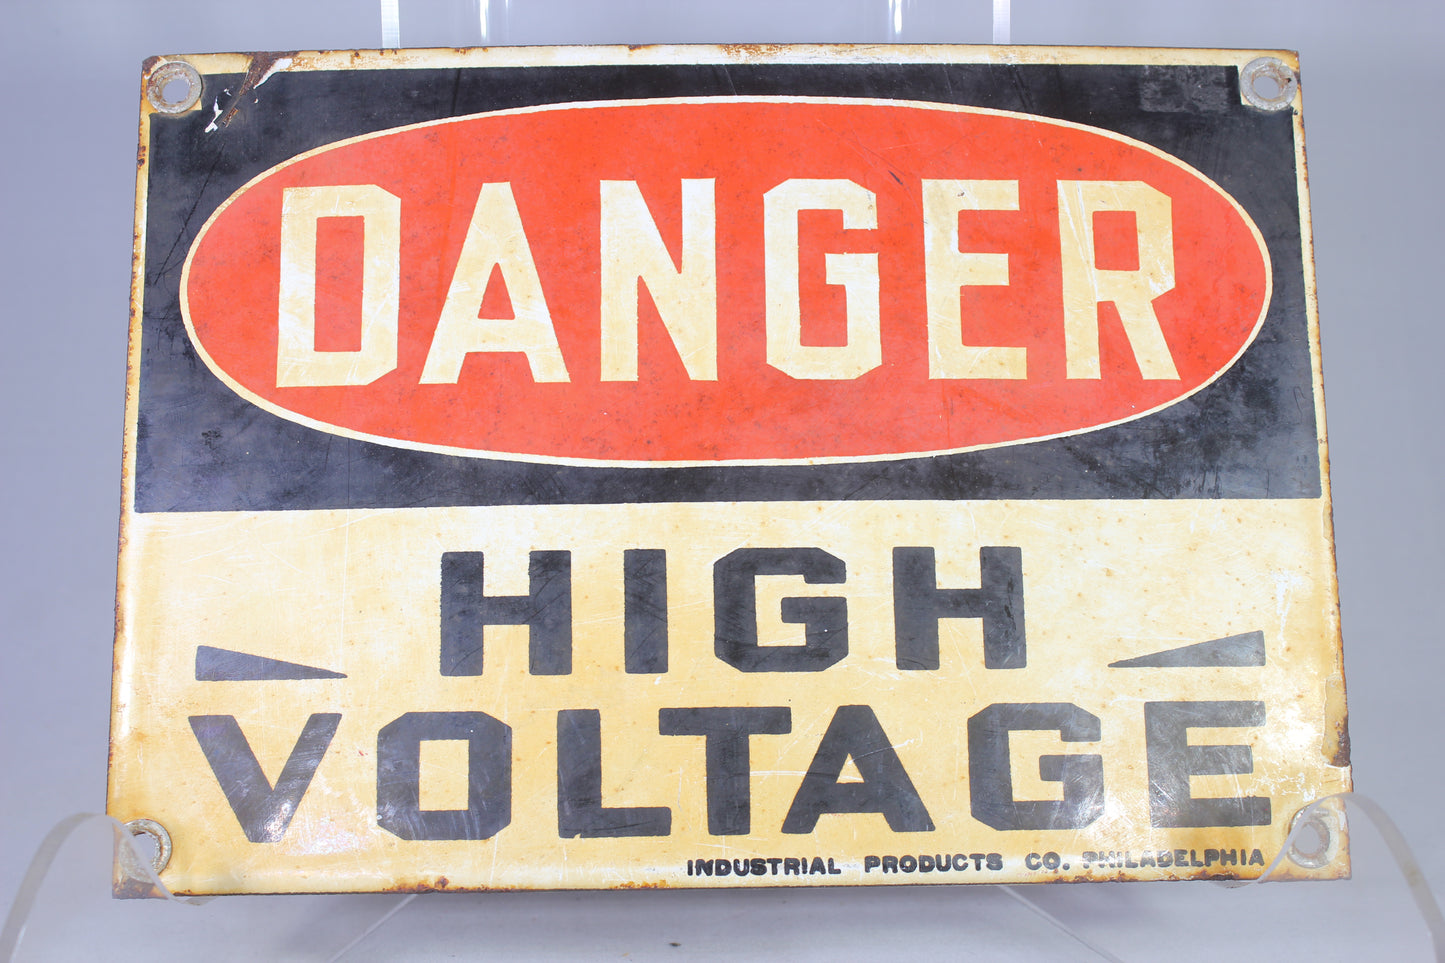 Antique "Danger High Voltage" Porcelain Safety Sign by Industrial Products Co.